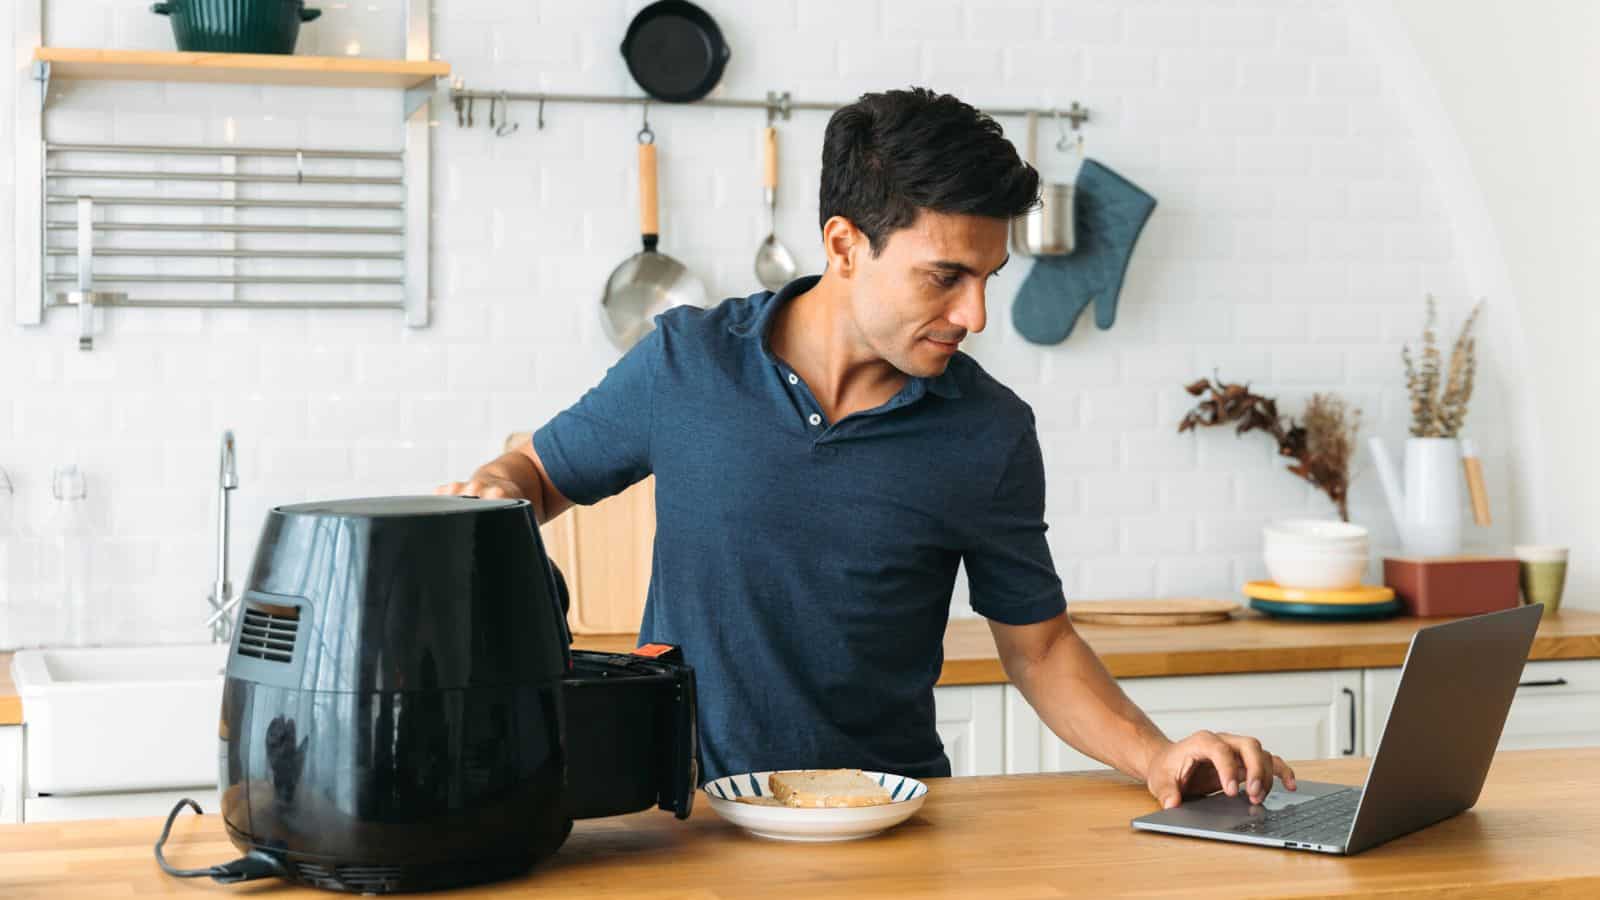 Man checking recipe on computer while working air fryer.
